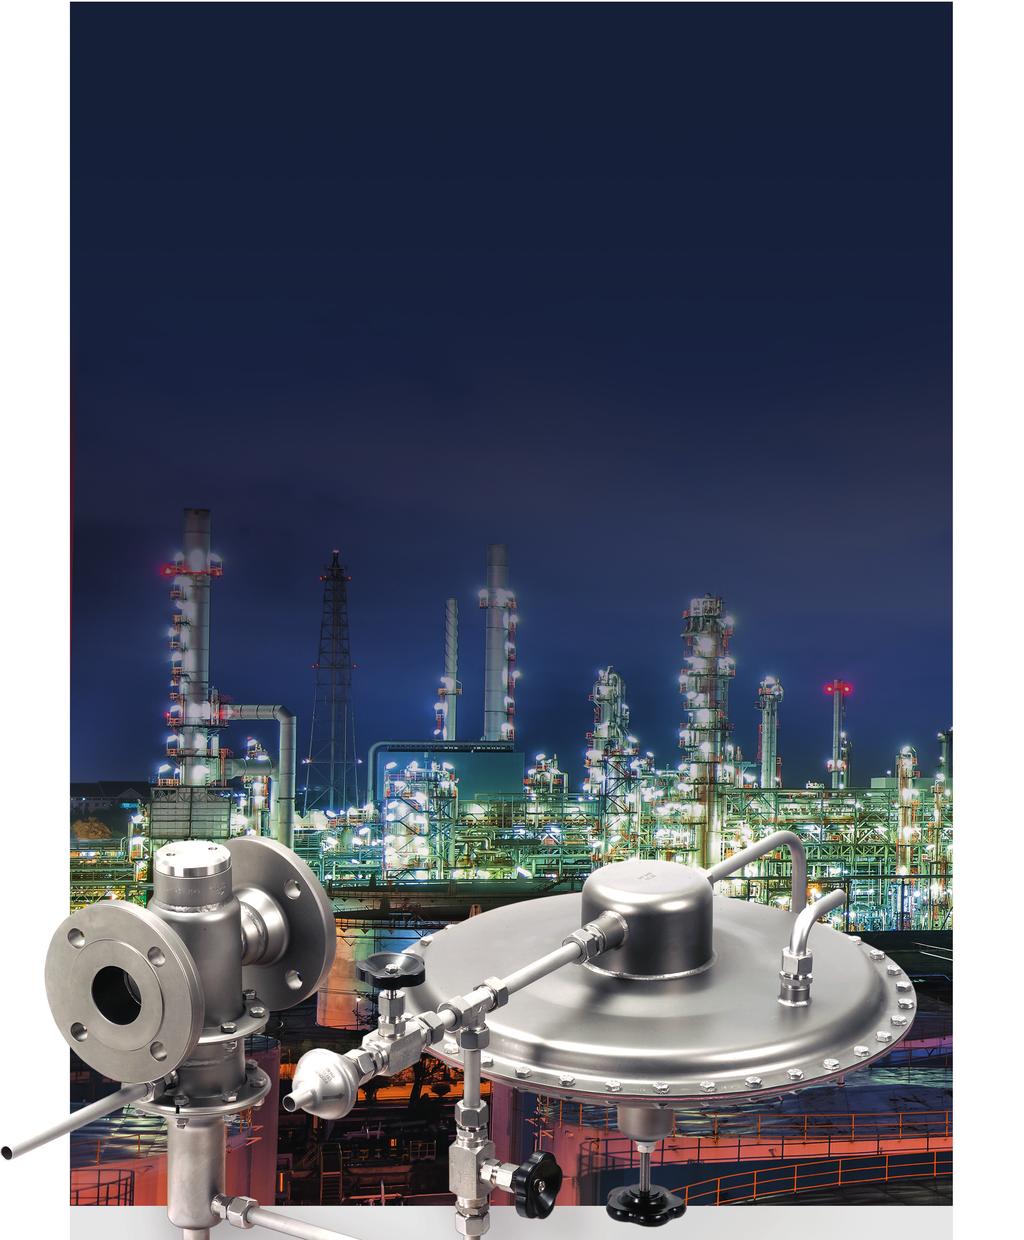 Mankenberg Pilot-operated Control Valve RP 840 in Action Petrochemical Plants become safer through Tank Blanketing Tank farms are used for the interim storage of large quantities of liquid or gaseous